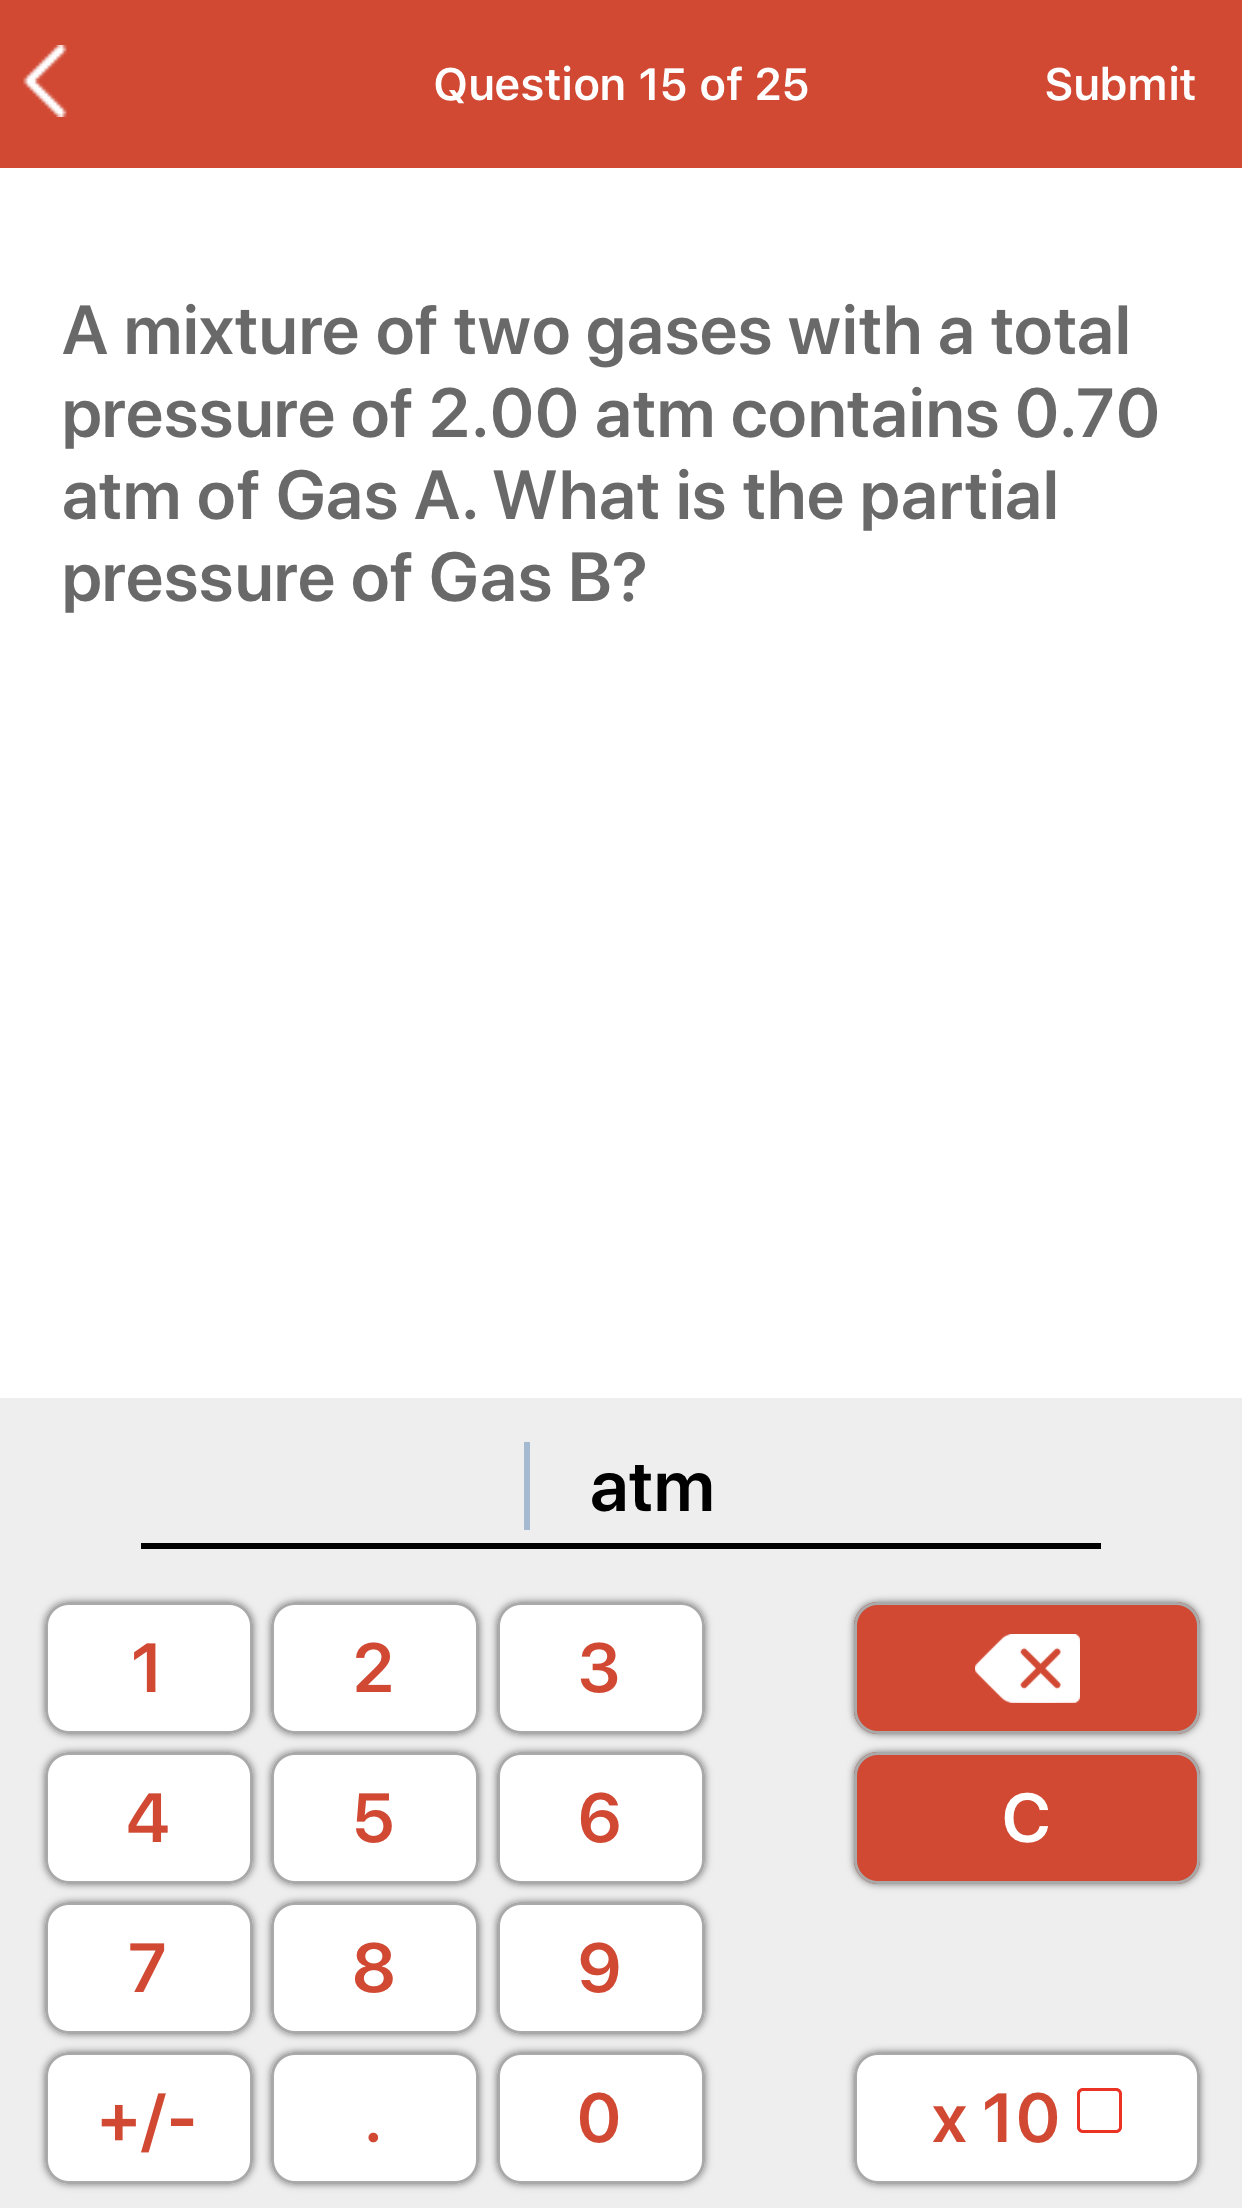 A mixture of two gases with a total
pressure of 2.00 atm contains 0.70
atm of Gas A. What is the partial
pressure of Gas B?
